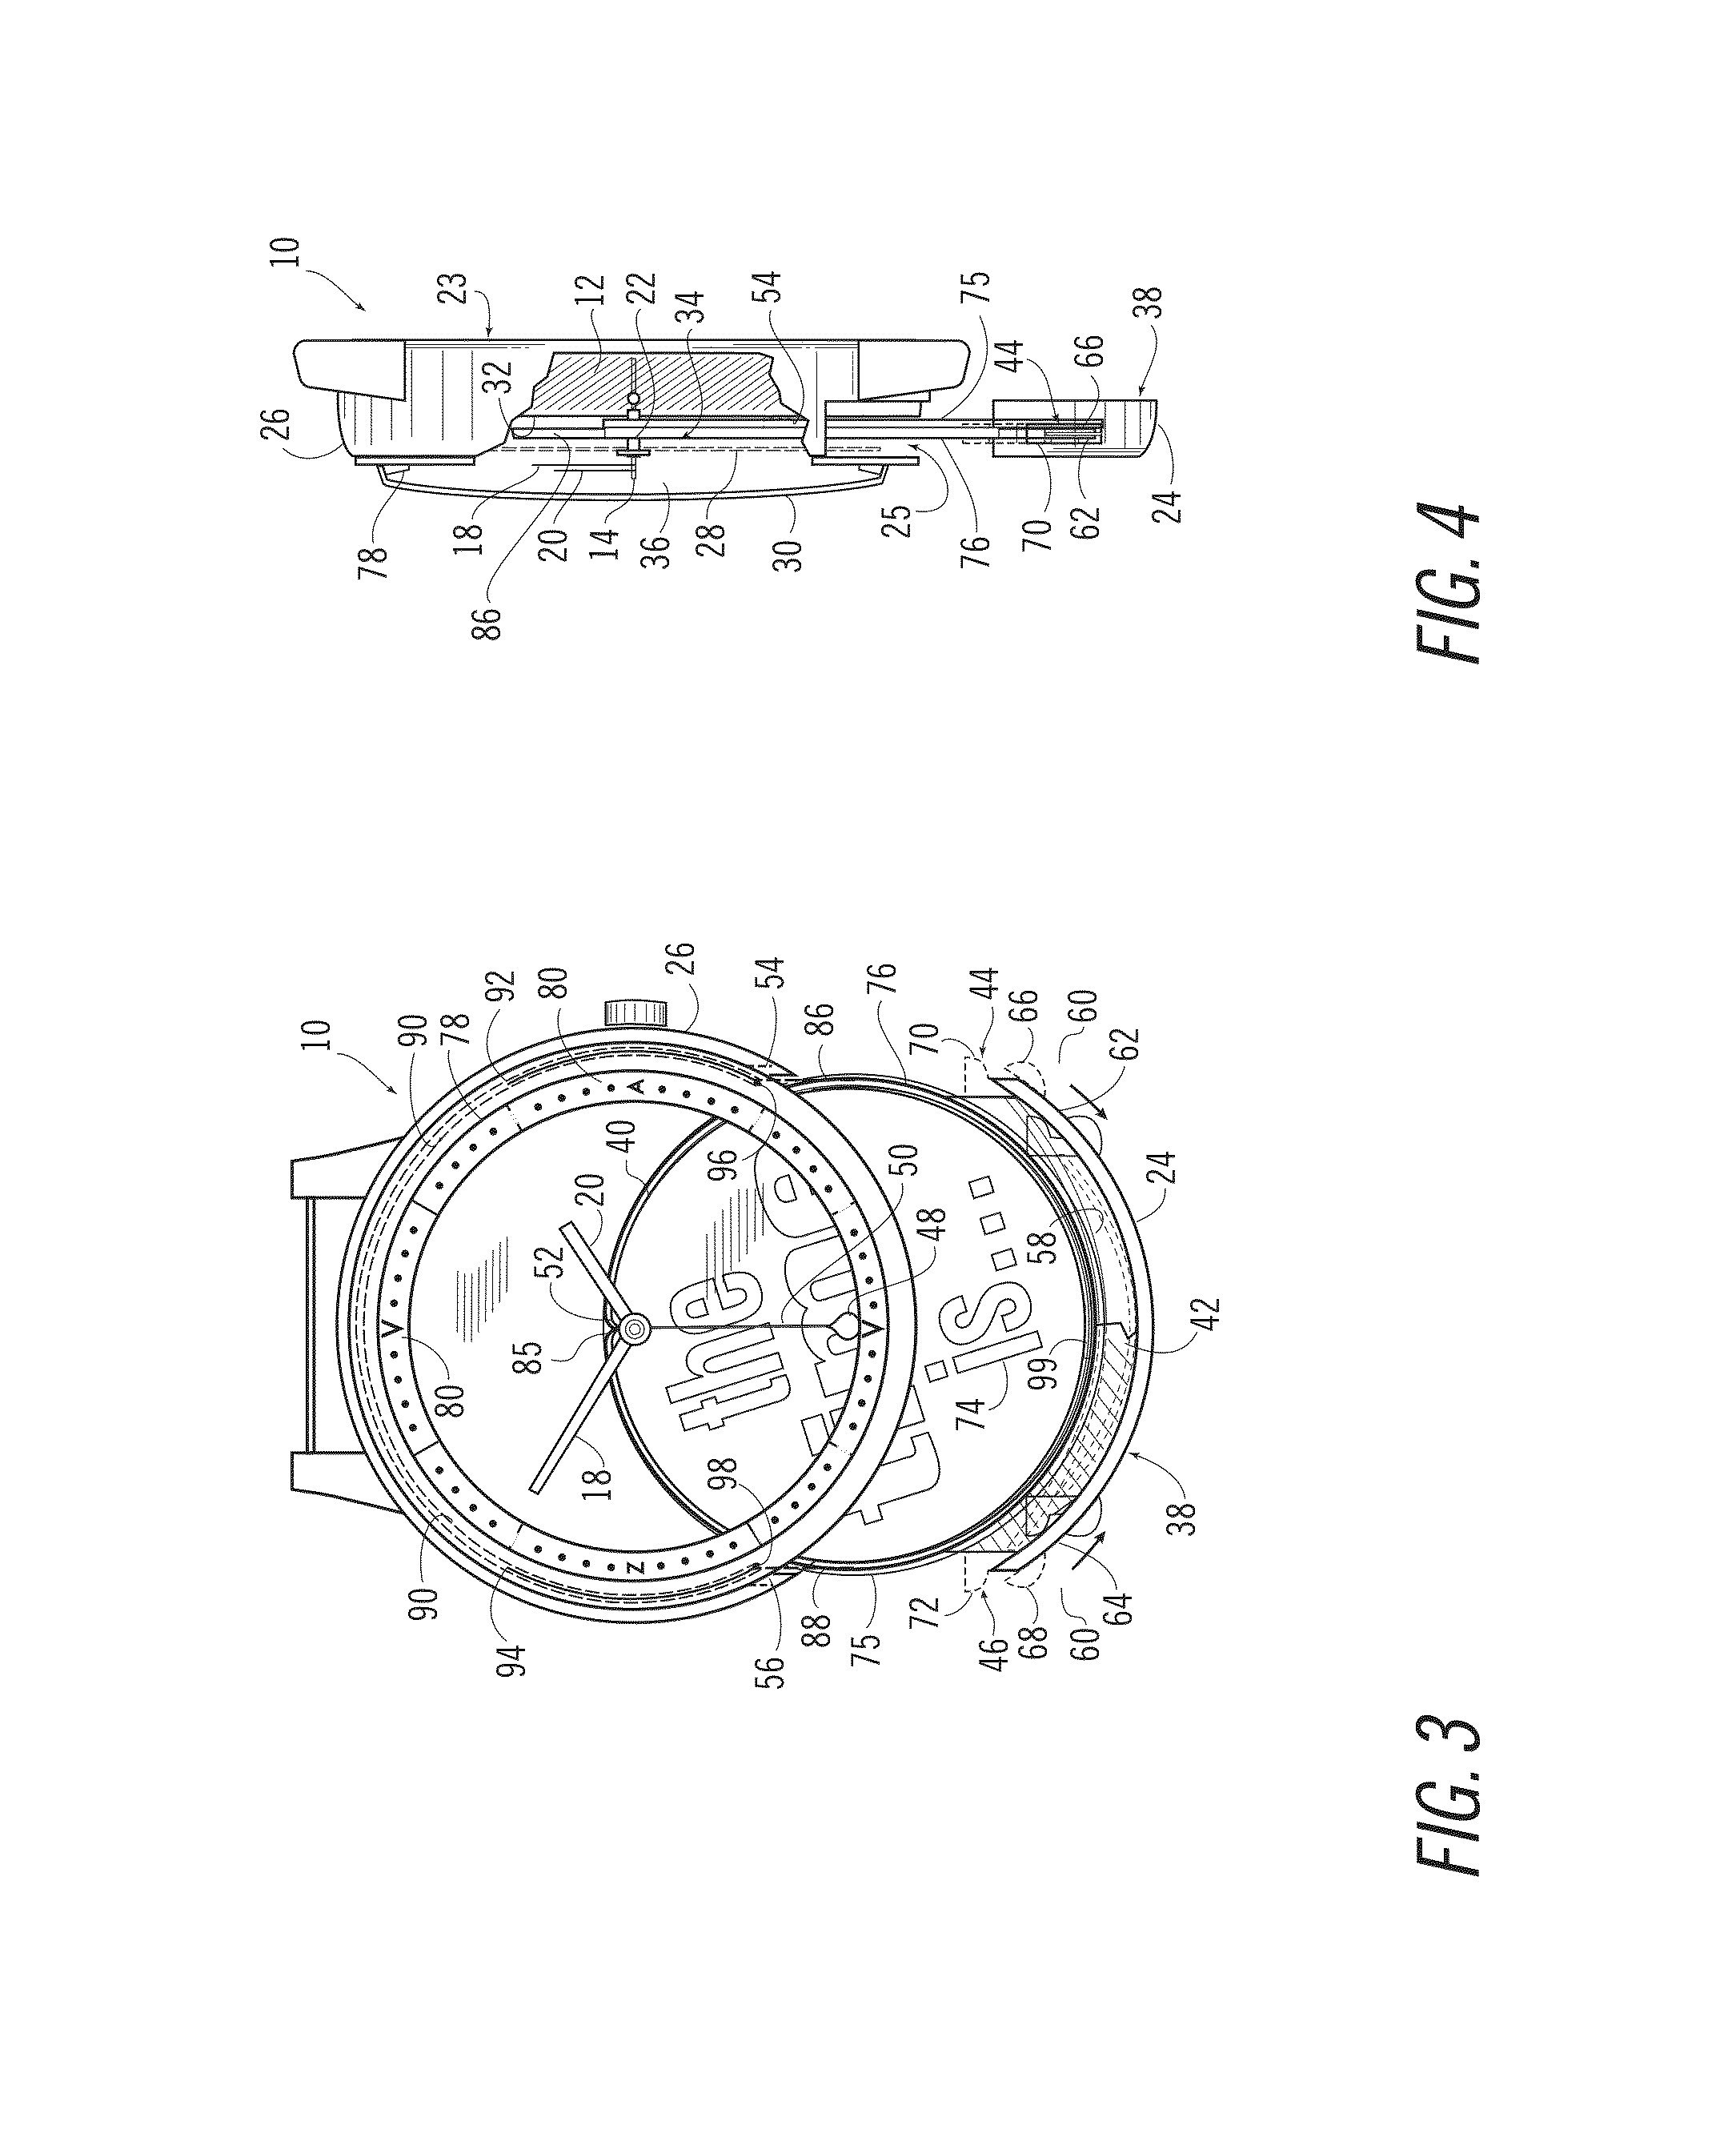 Apparatus for horologe with removable and interchangeable face